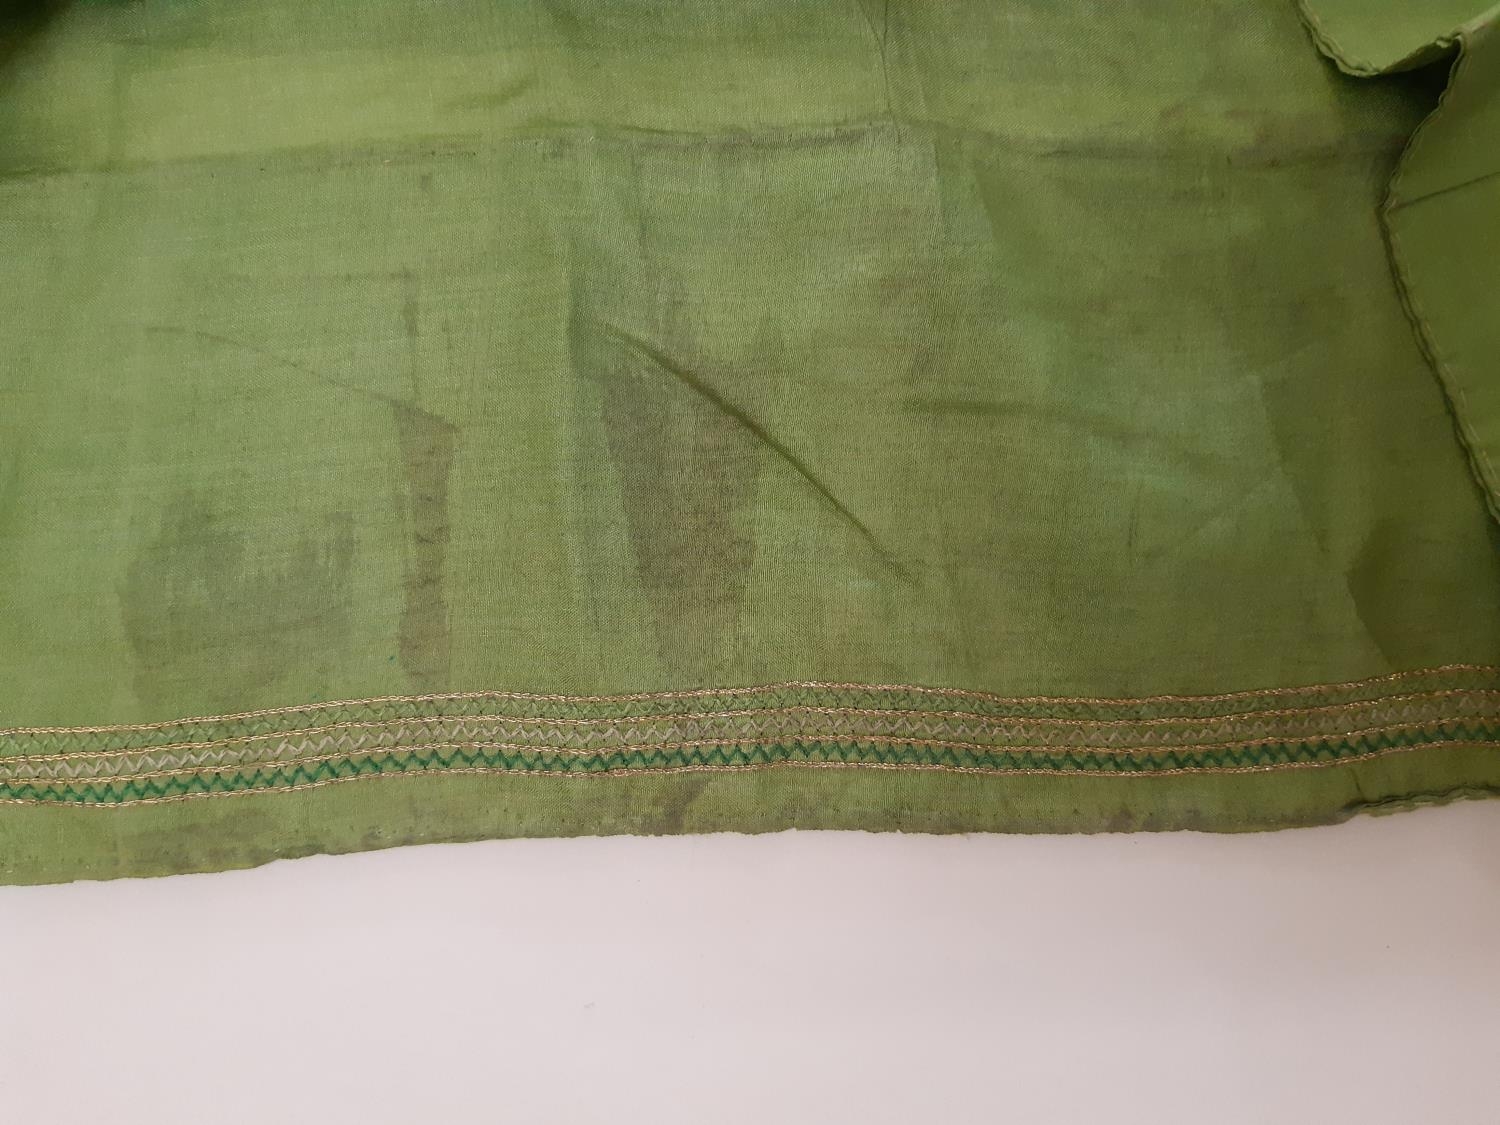 5 Indian saris by Krishna Sarees, unused in original packaging, together with 5 colourful silk saris - Image 7 of 7